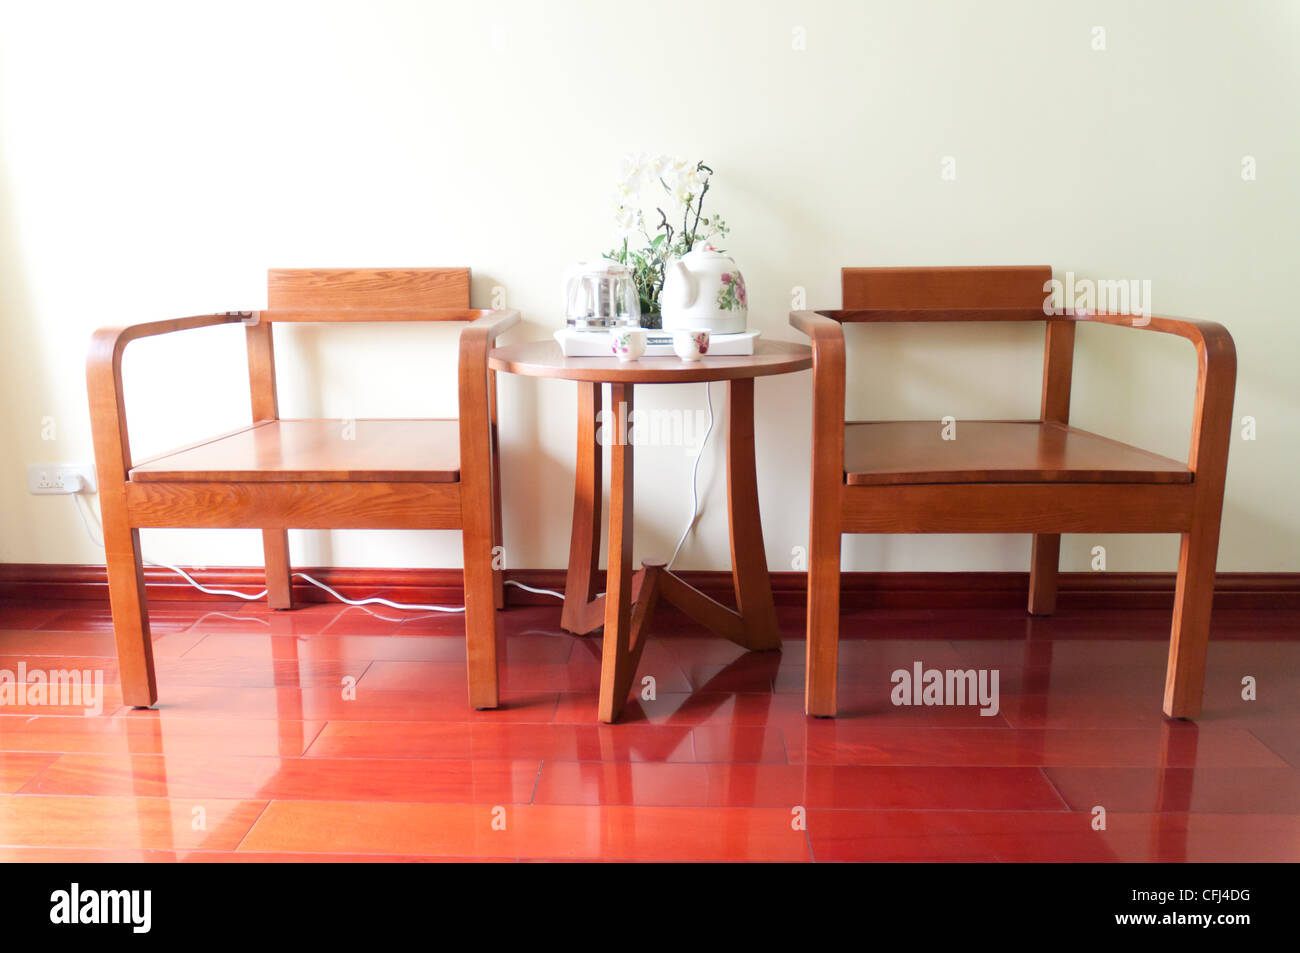 A pair of wooden chairs and tea table Stock Photo